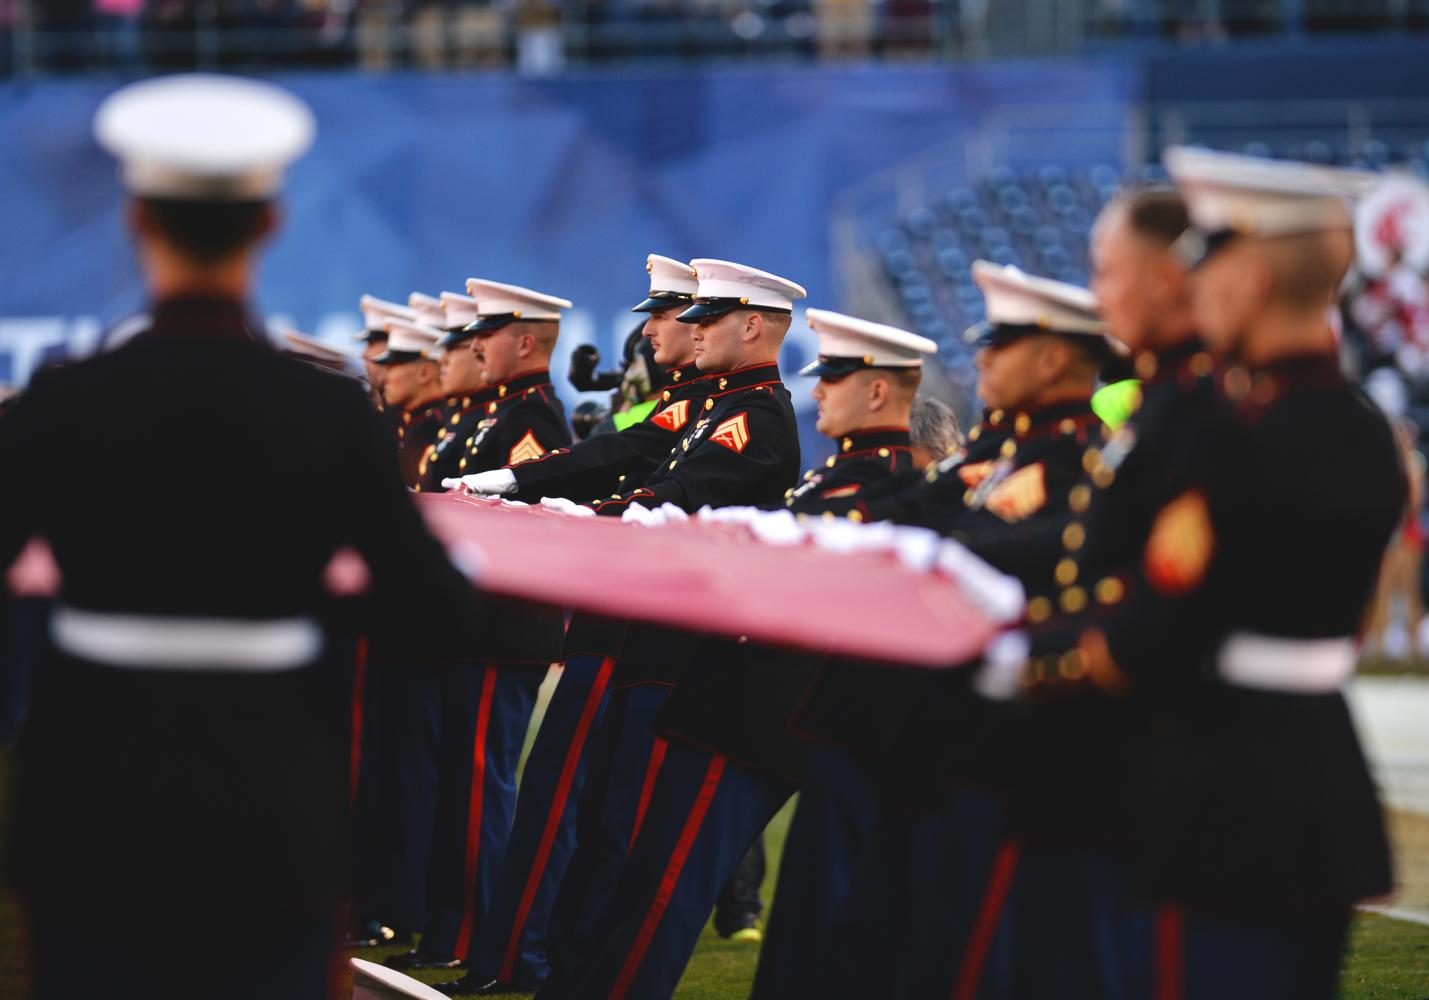 Members+of+the+Marine+Corps+display+the+American+flag+during+the+Holiday+Bowl+pregame+on+December+27%2C+2016+at+Qualcomm+Stadium+in+San+Diego%2C+CA.+